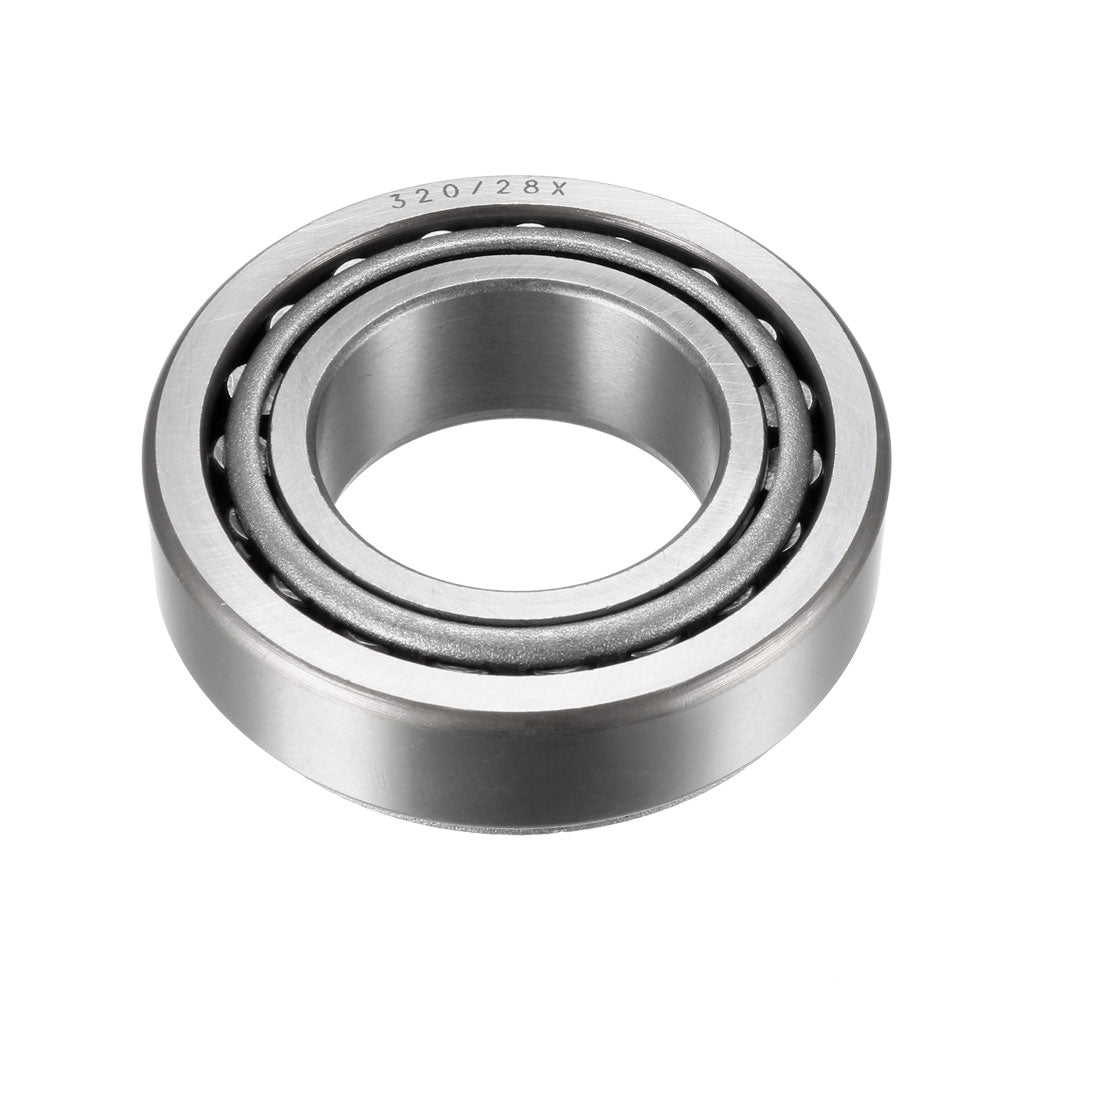 uxcell Uxcell 320/28X Tapered Roller Bearing Cone and Cup Set 28mm Bore 52mm O.D. 2pcs